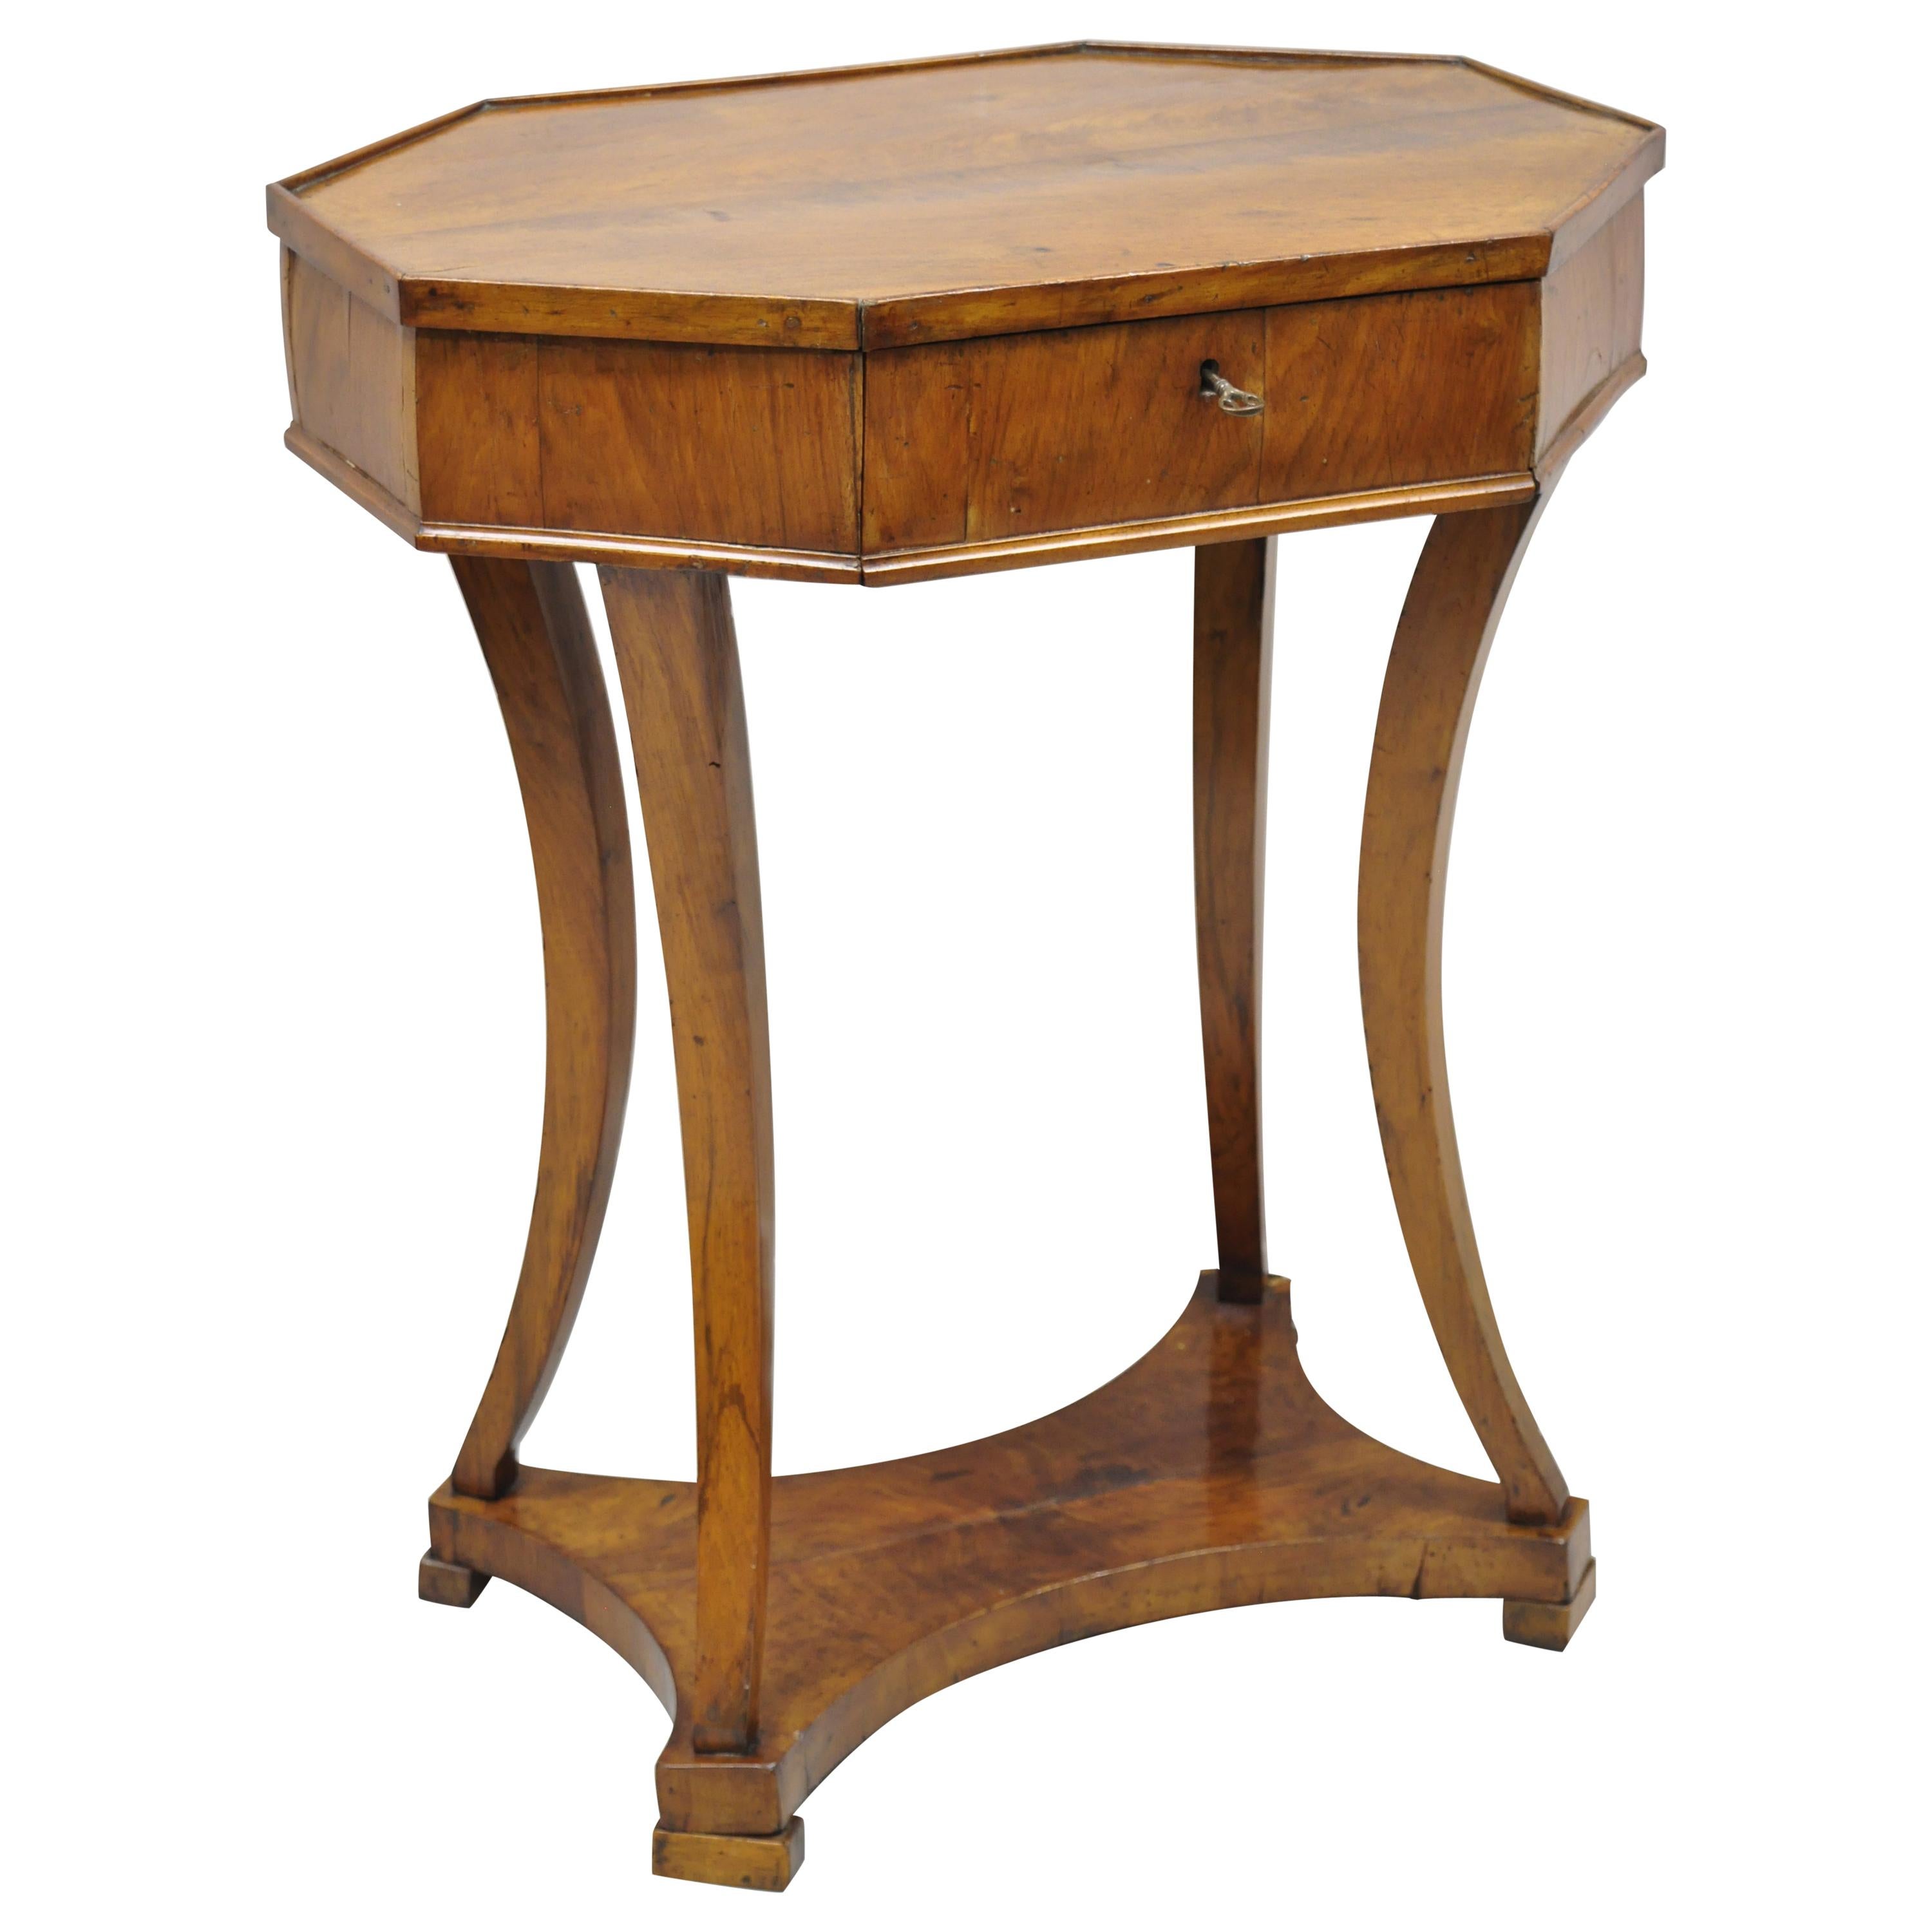 Antique Cherry Wood Italian Biedermeier One Drawer Accent Lamp Side Table For Sale